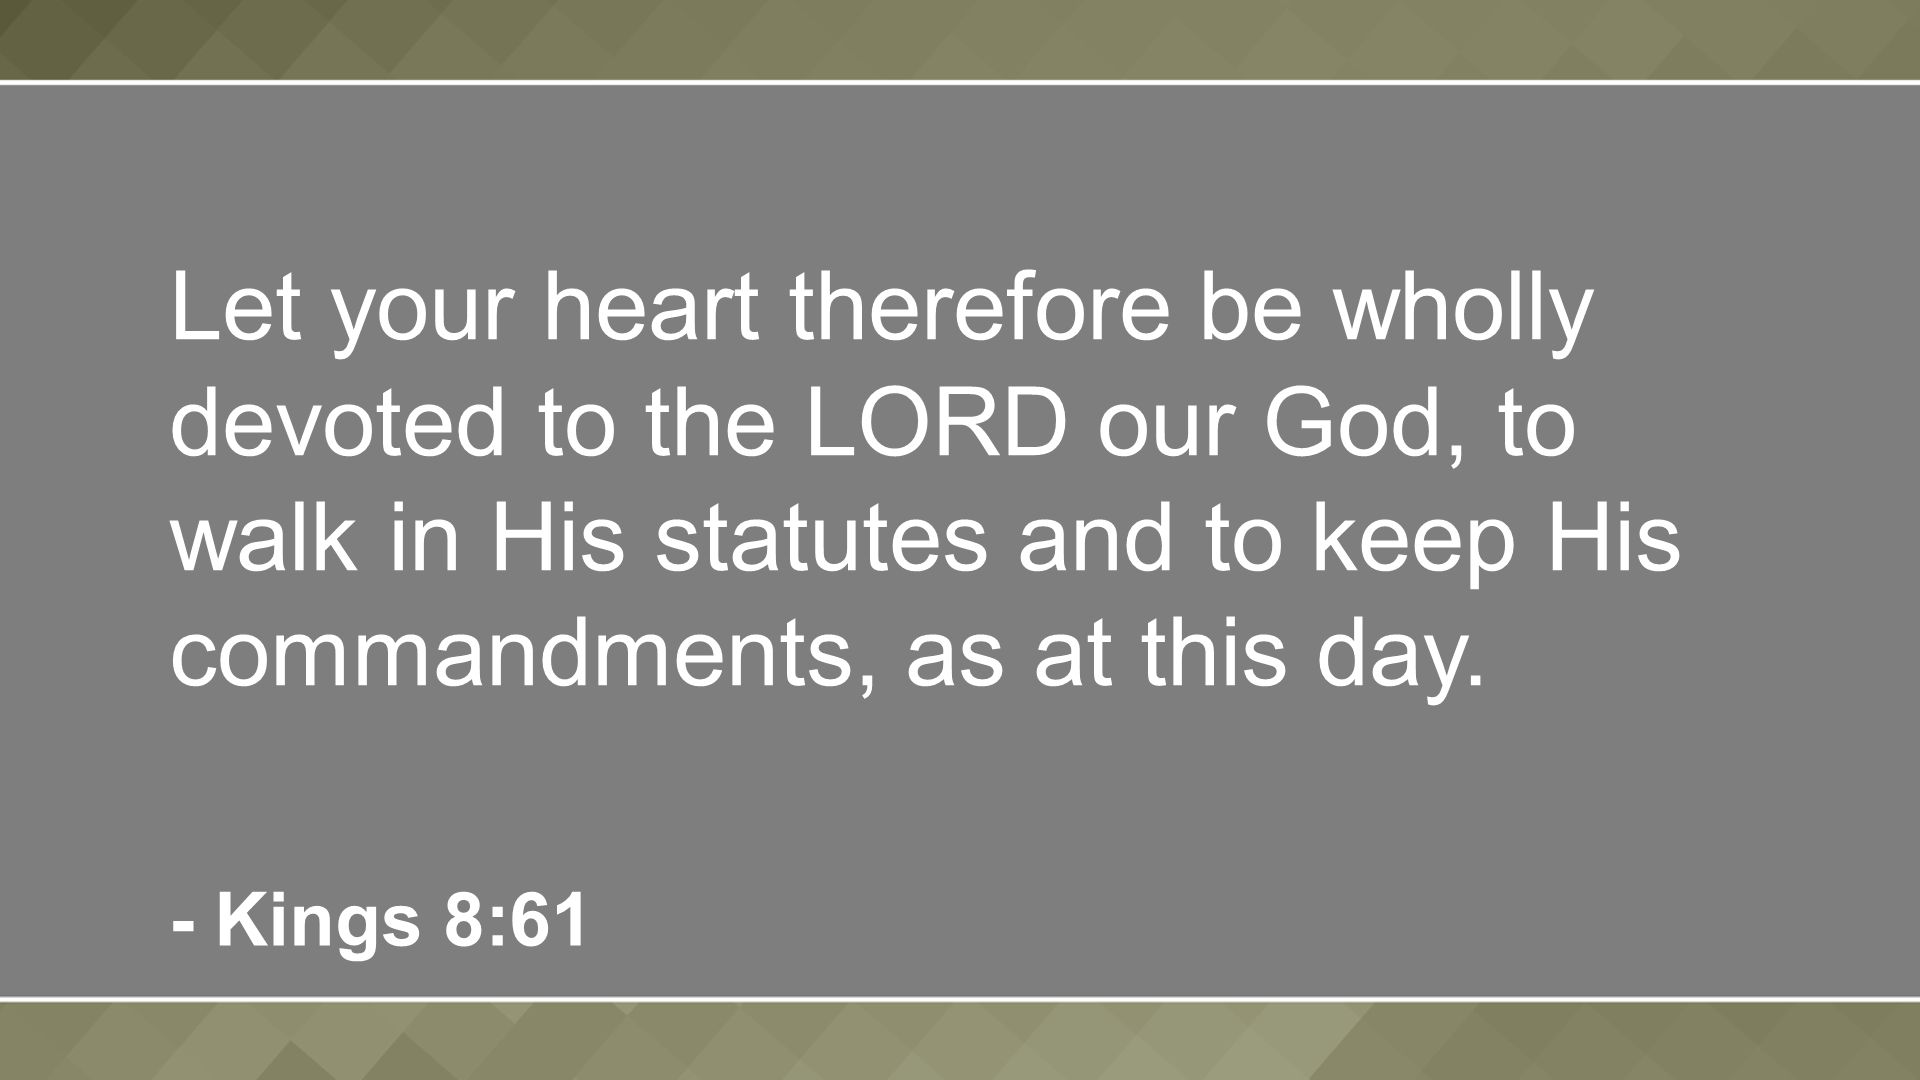 Let your heart therefore be wholly devoted to the LORD our God, to walk in His statutes and to keep His commandments, as at this day.